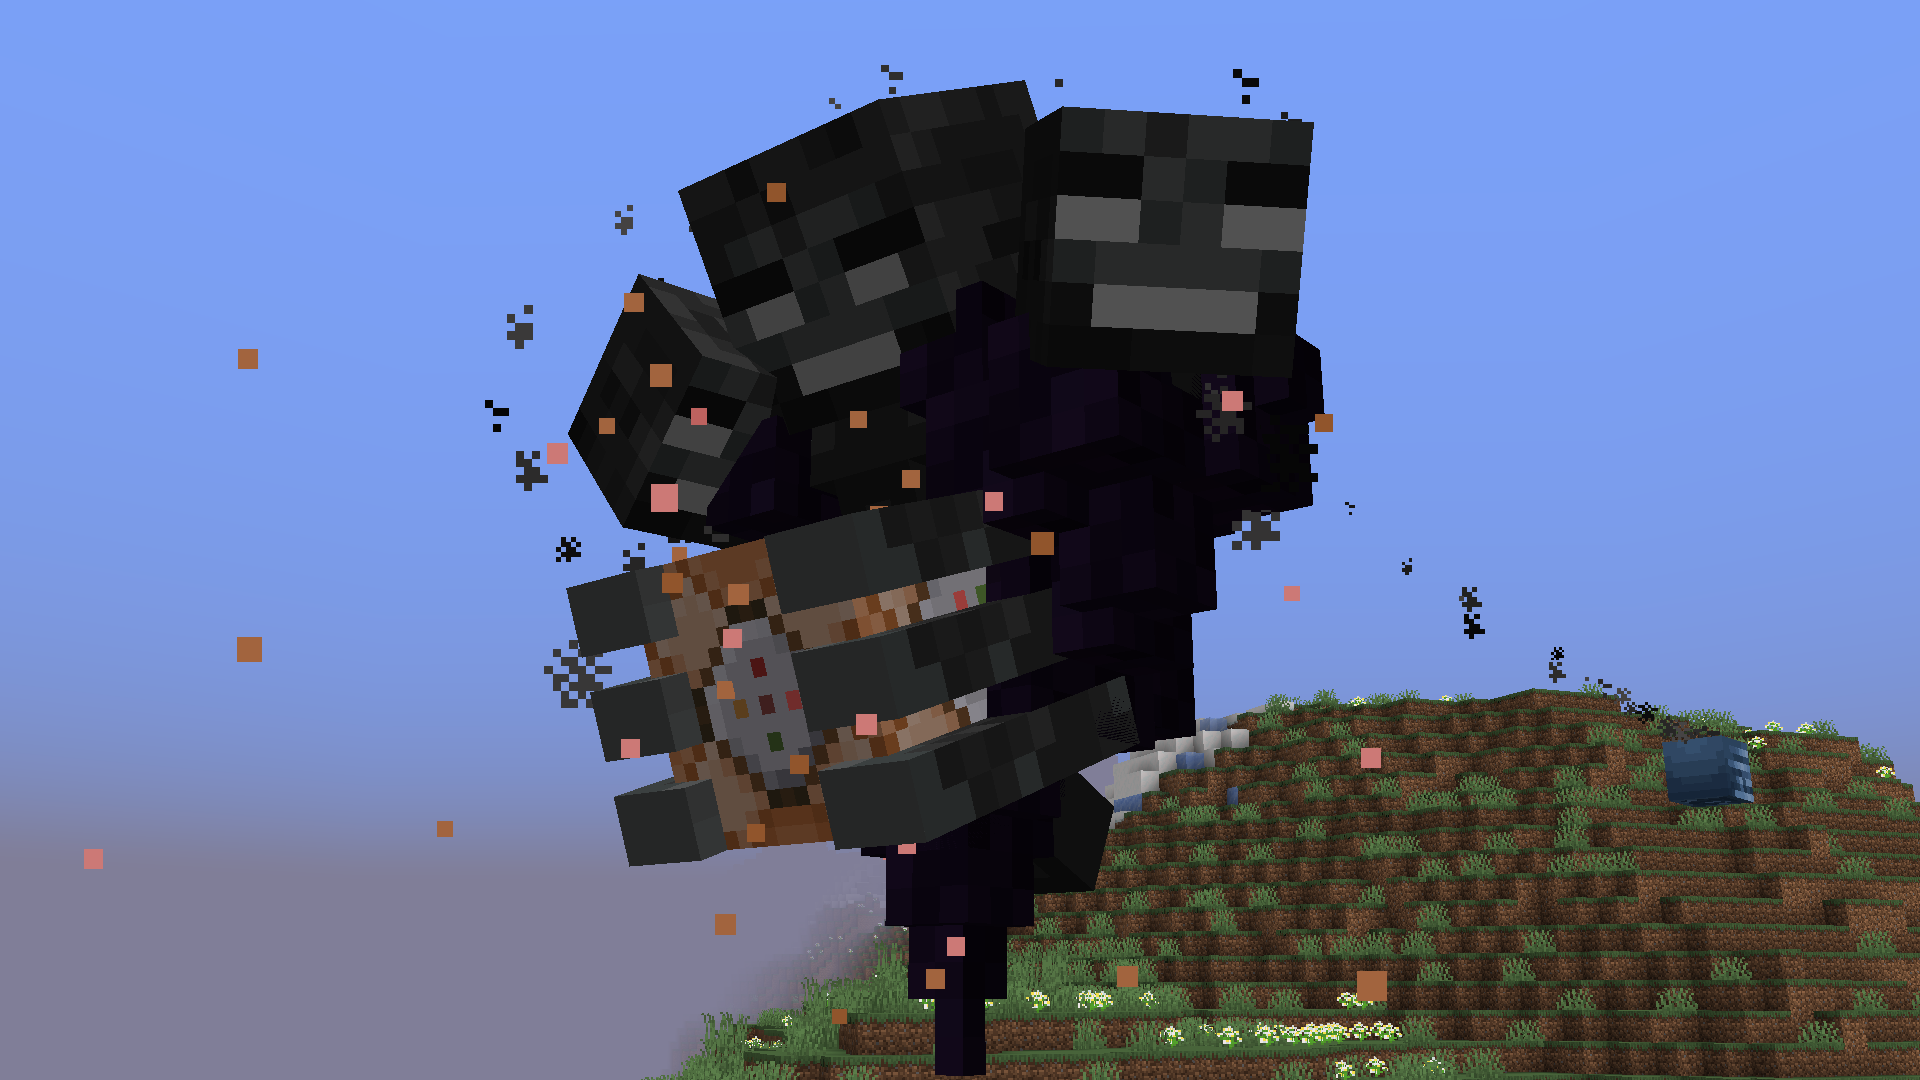 Cracker's Wither Storm Mod - Minecraft Mods - CurseForge